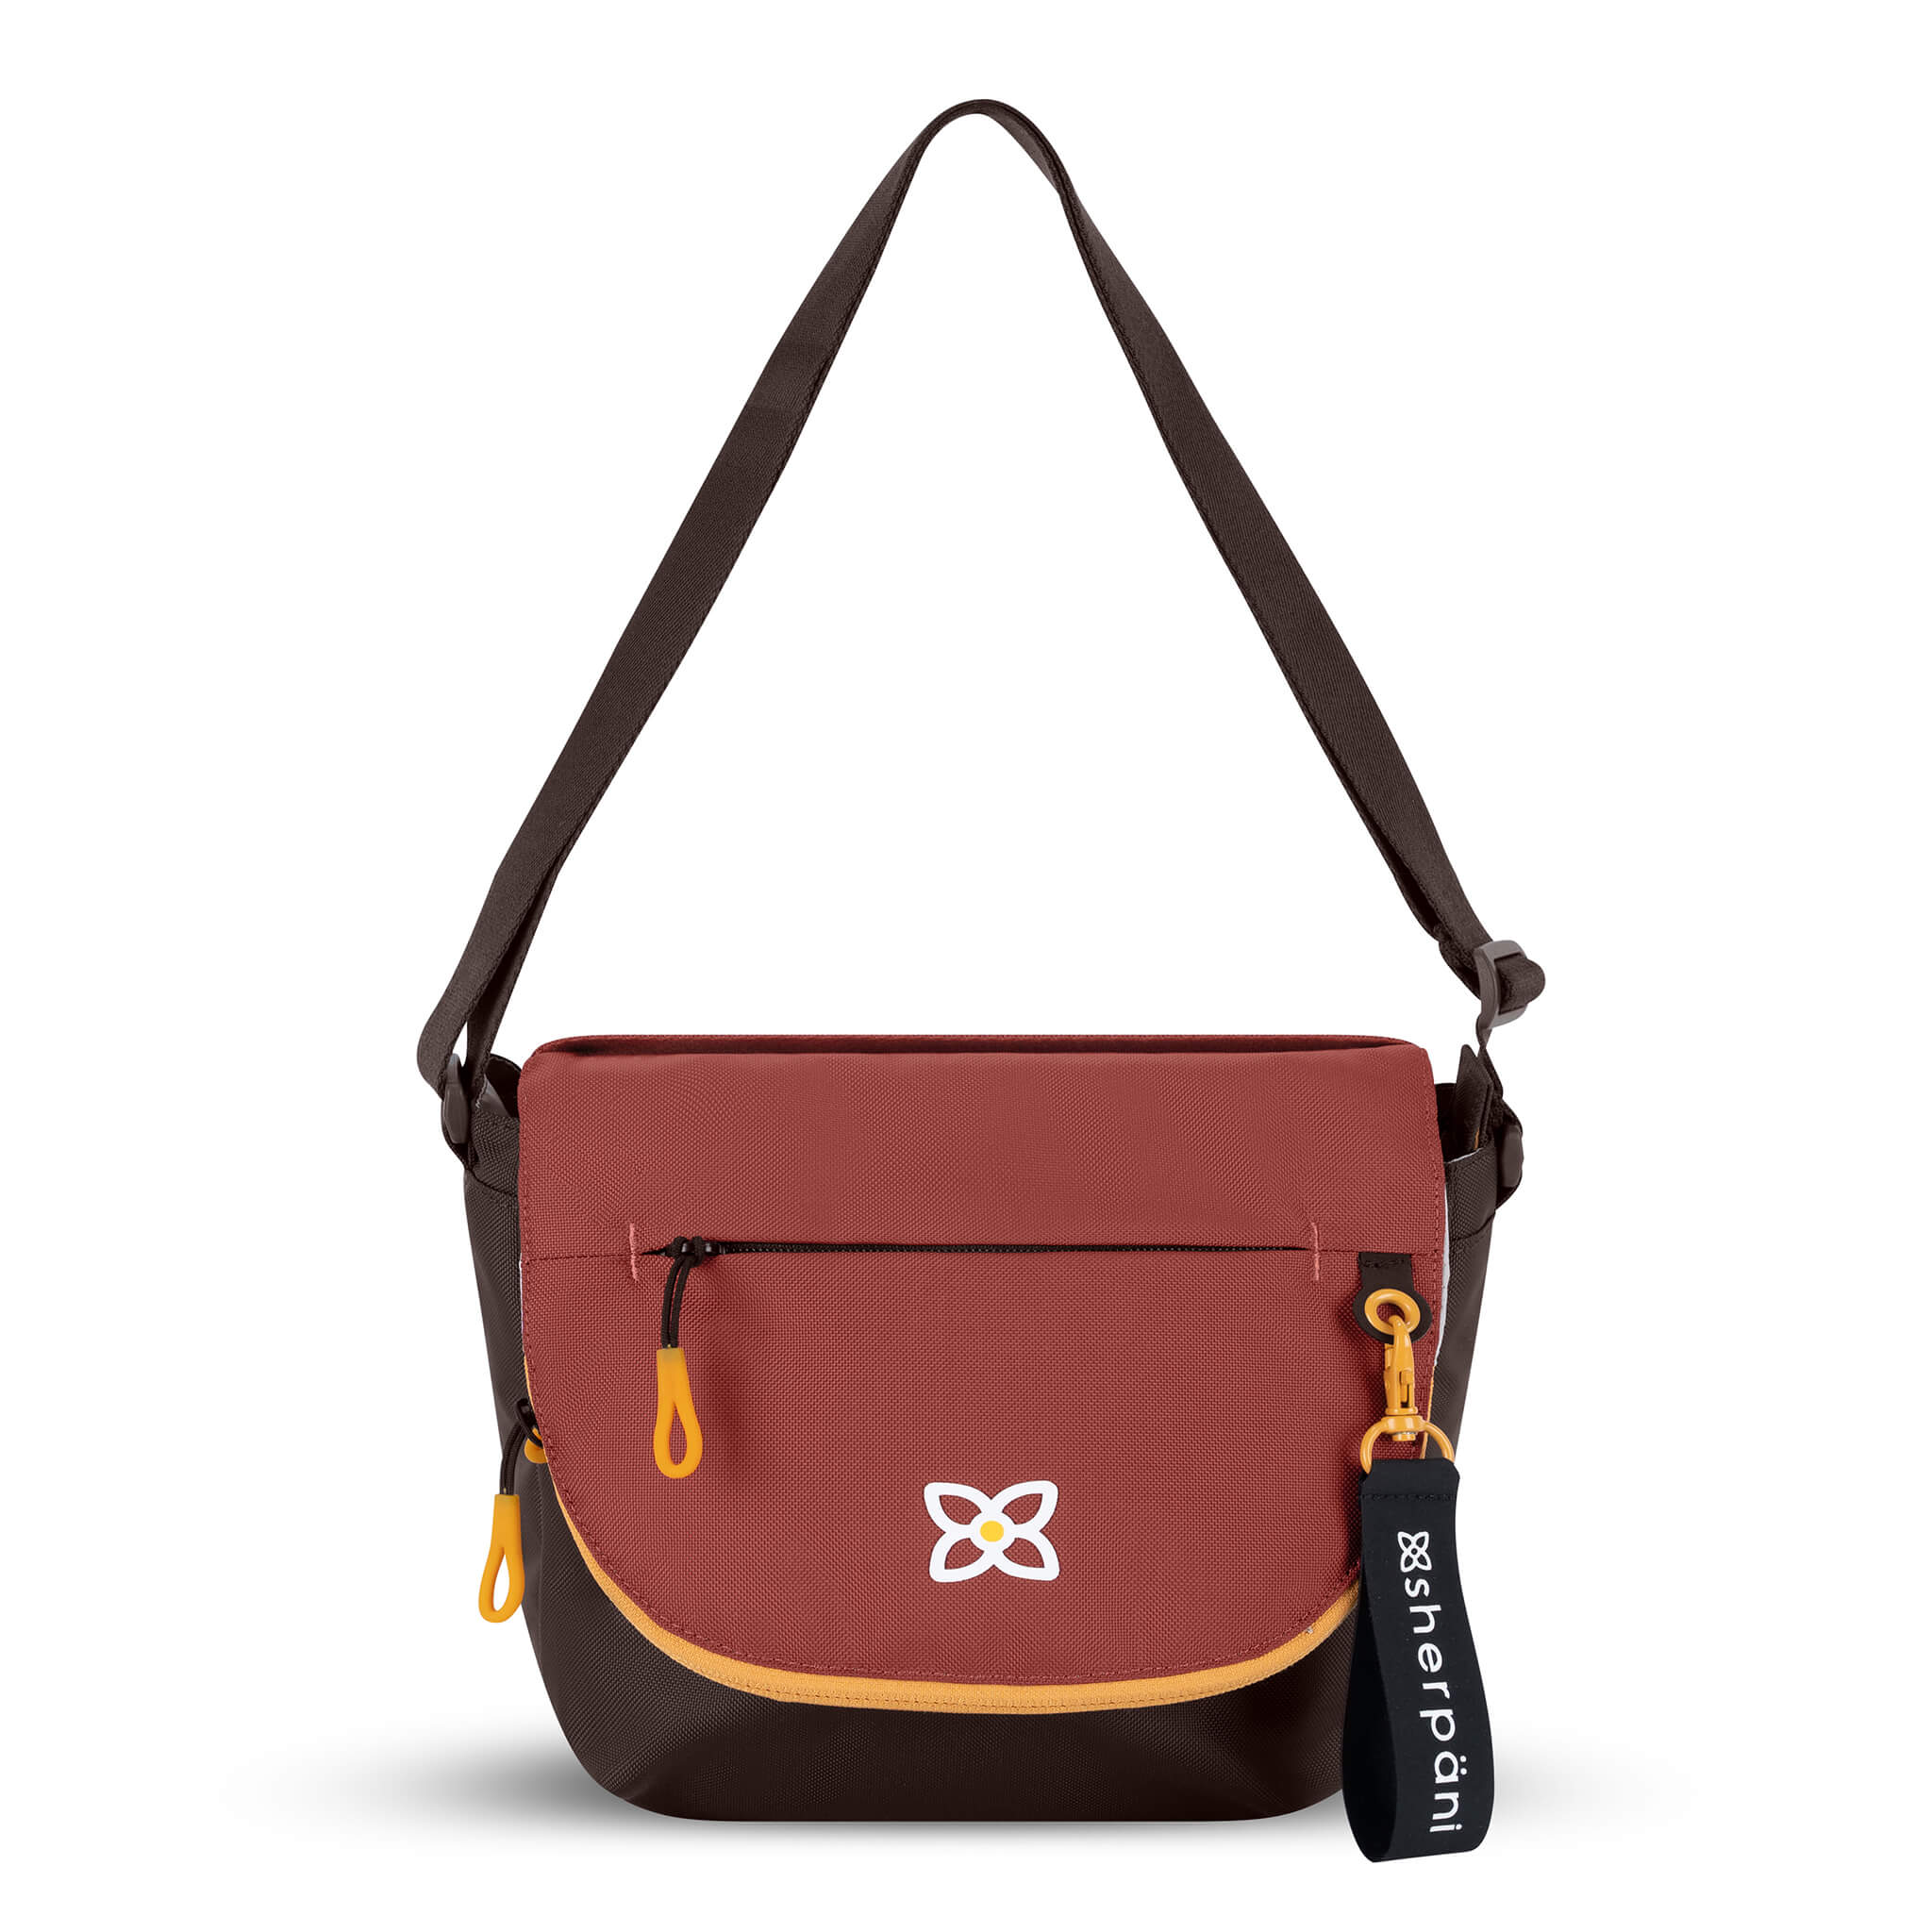 Flat front view of Sherpani messenger satchel bag, the Milli in Cider. Milli features include an adjustable crossbody strap, front zipper pocket, brimmed zipper pocket, detachable keychain, magnetic closure, RFID security and multiple internal pockets for organization. The Cider color is two-toned in burgundy and dark brown with yellow accents. 